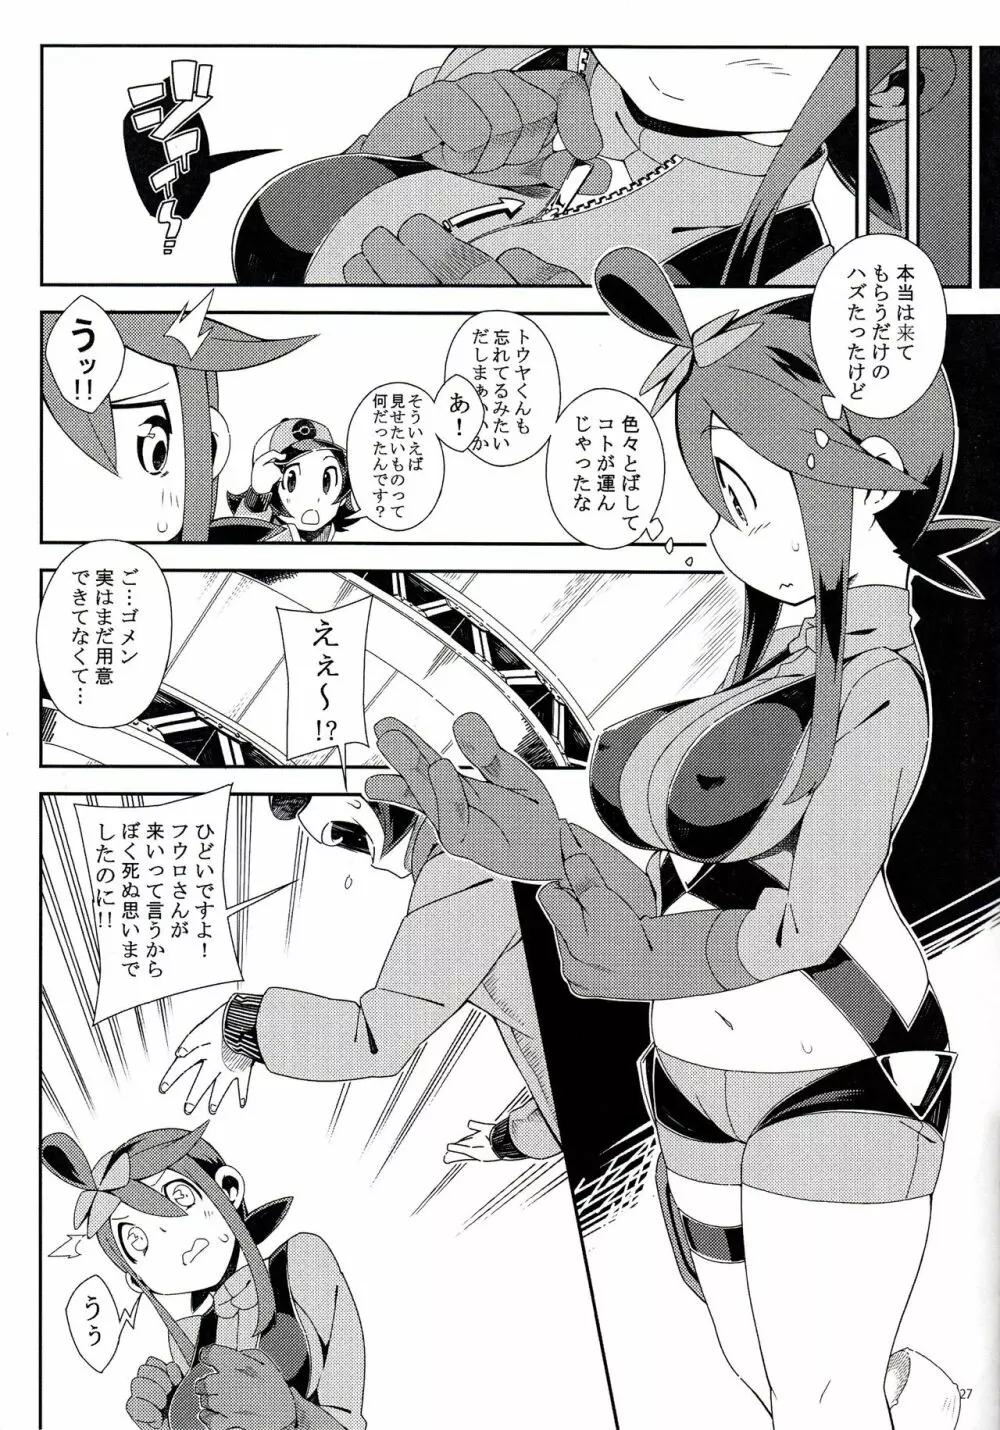 Re.ブットビガールトモットイイコト。 - page26